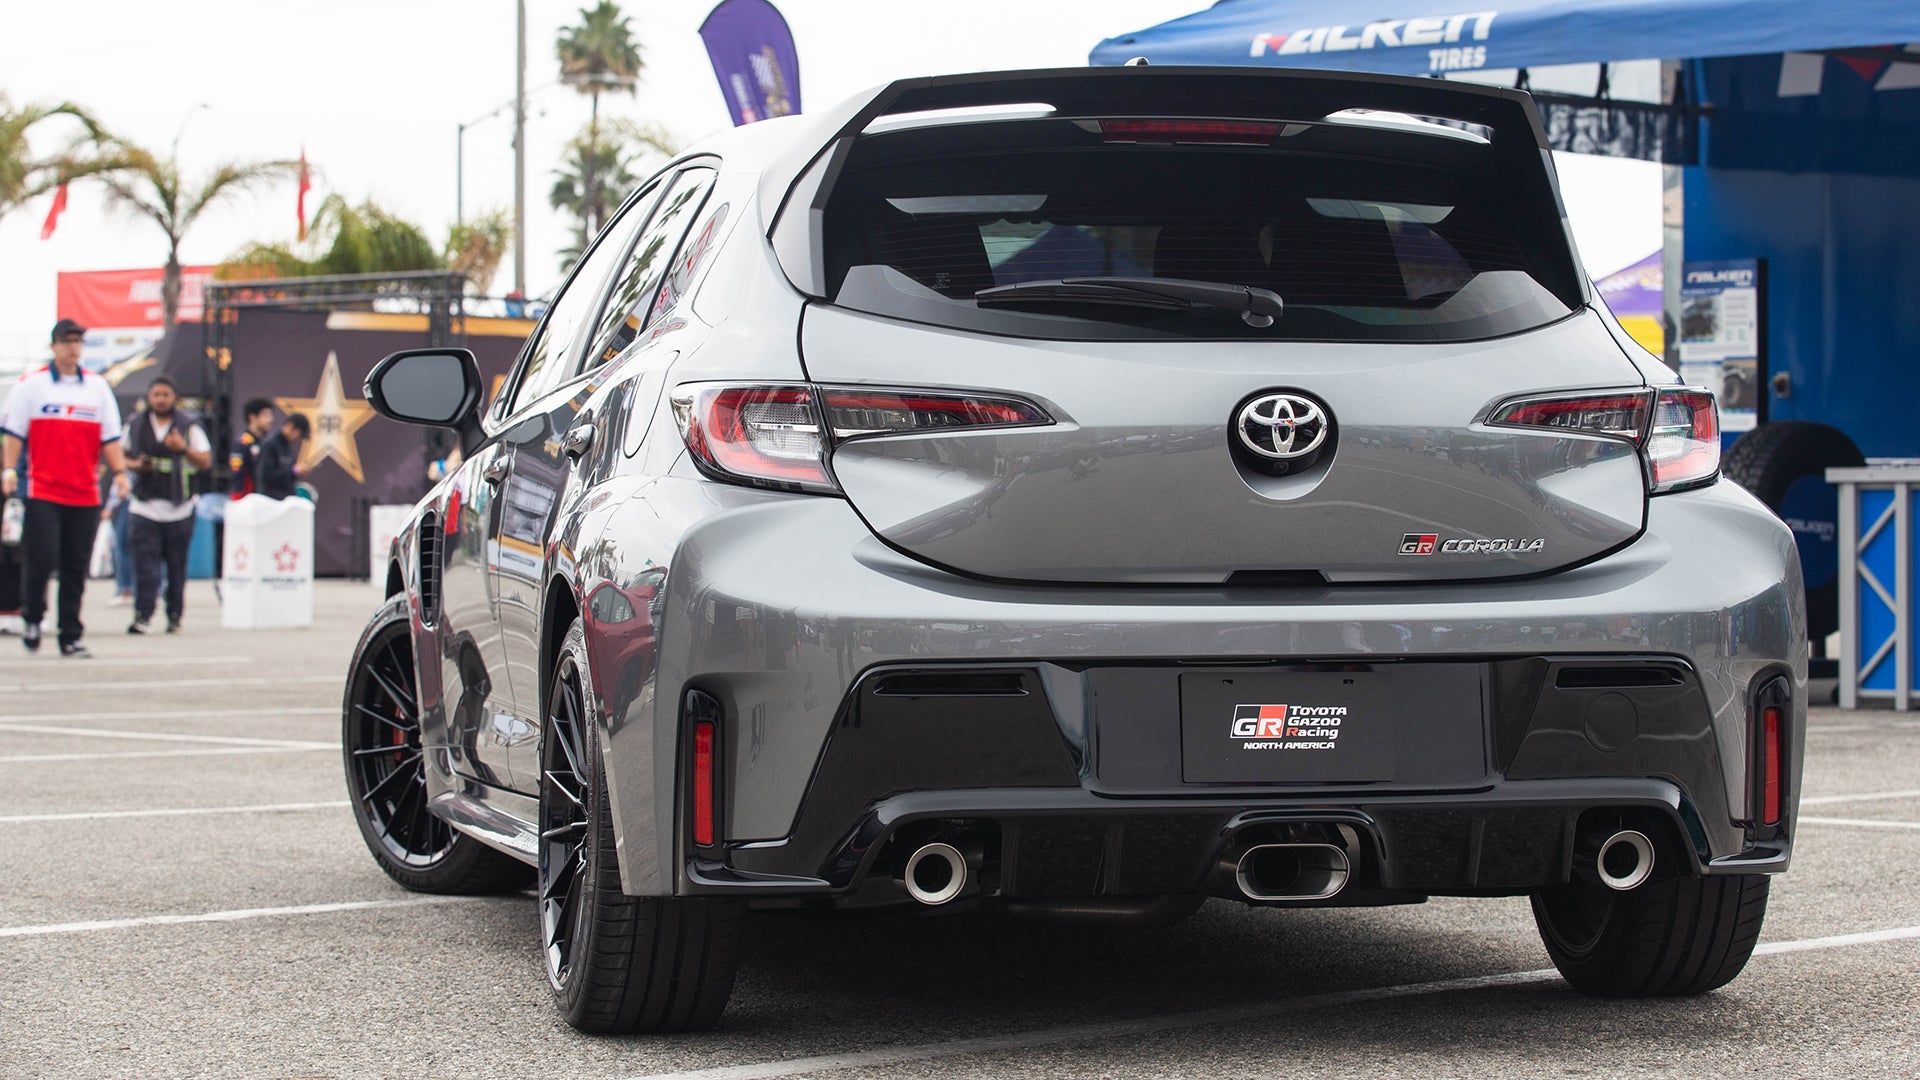 Here’s Why the 2023 Toyota GR Corolla Has Three Exhaust Pipes